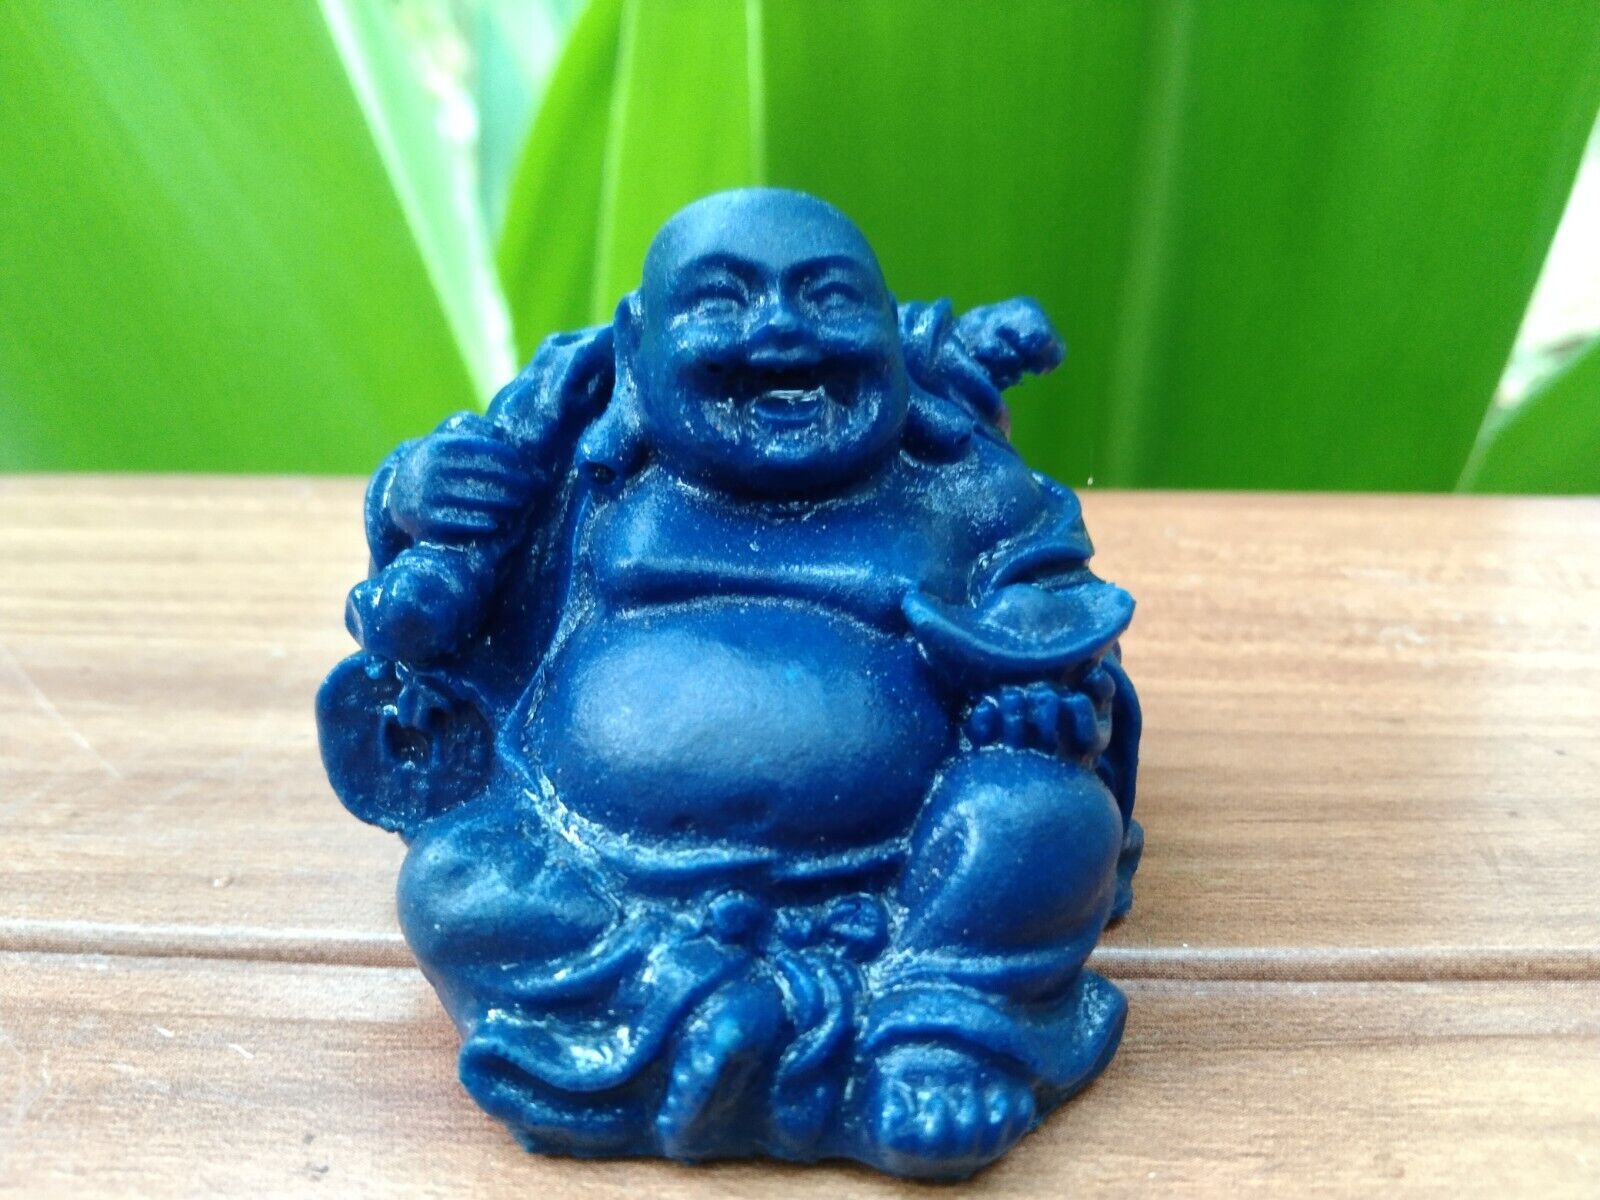 laughing buddha blue colour stone statue for gift lord figure budhism sculpture